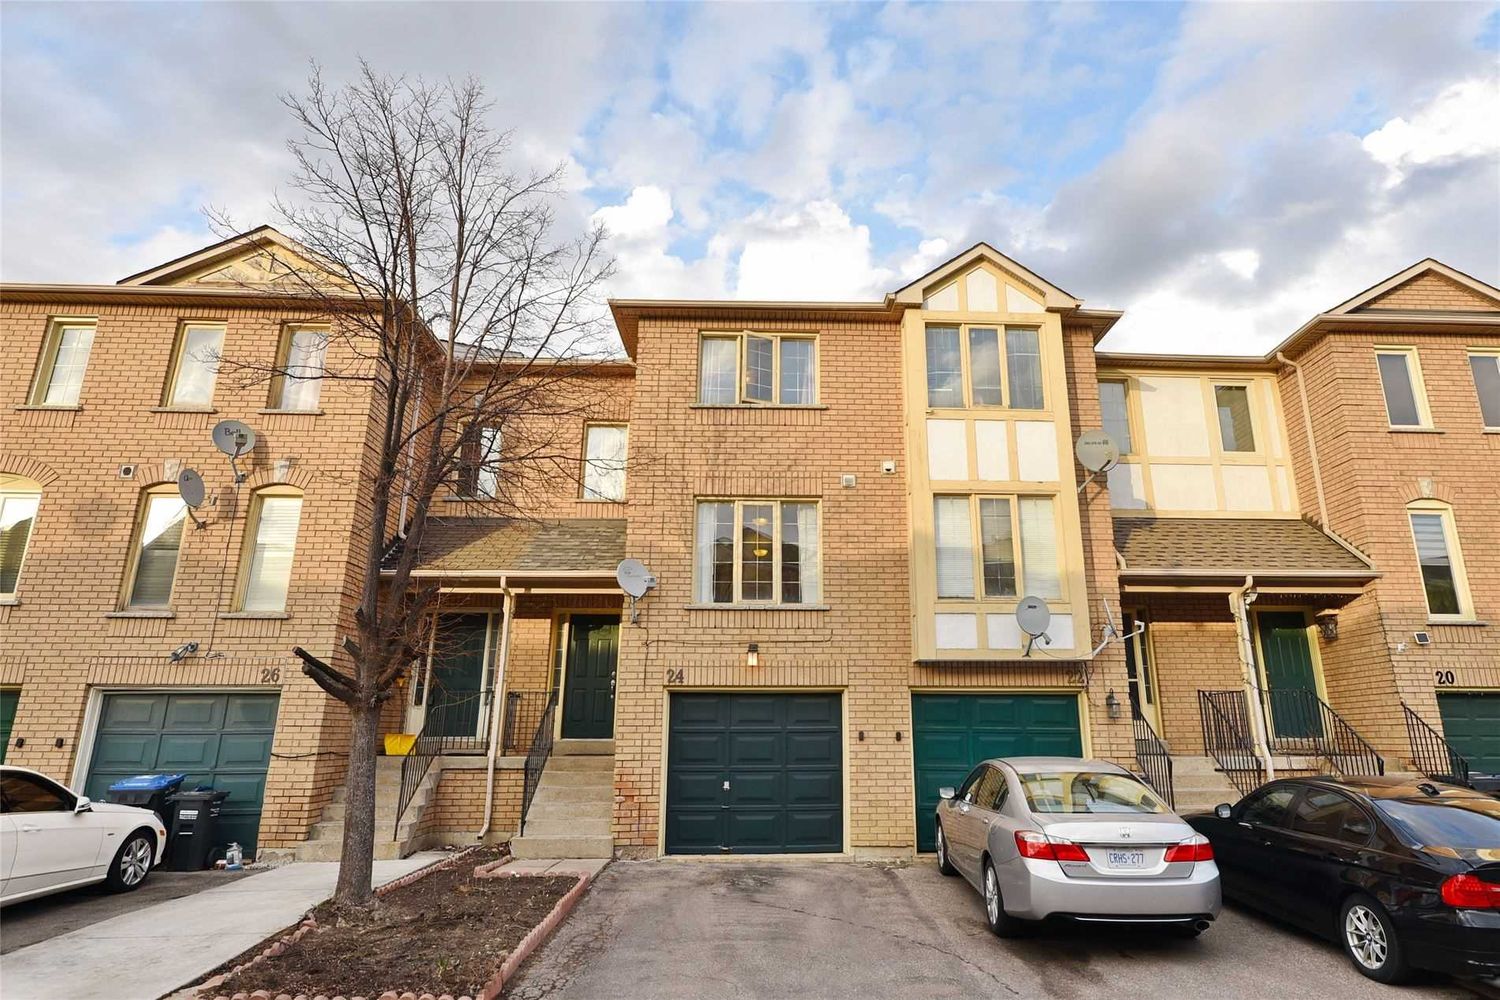 2 Sir Lou Drive. 2 Sir Lou Drive Townhomes is located in  Brampton, Toronto - image #1 of 2